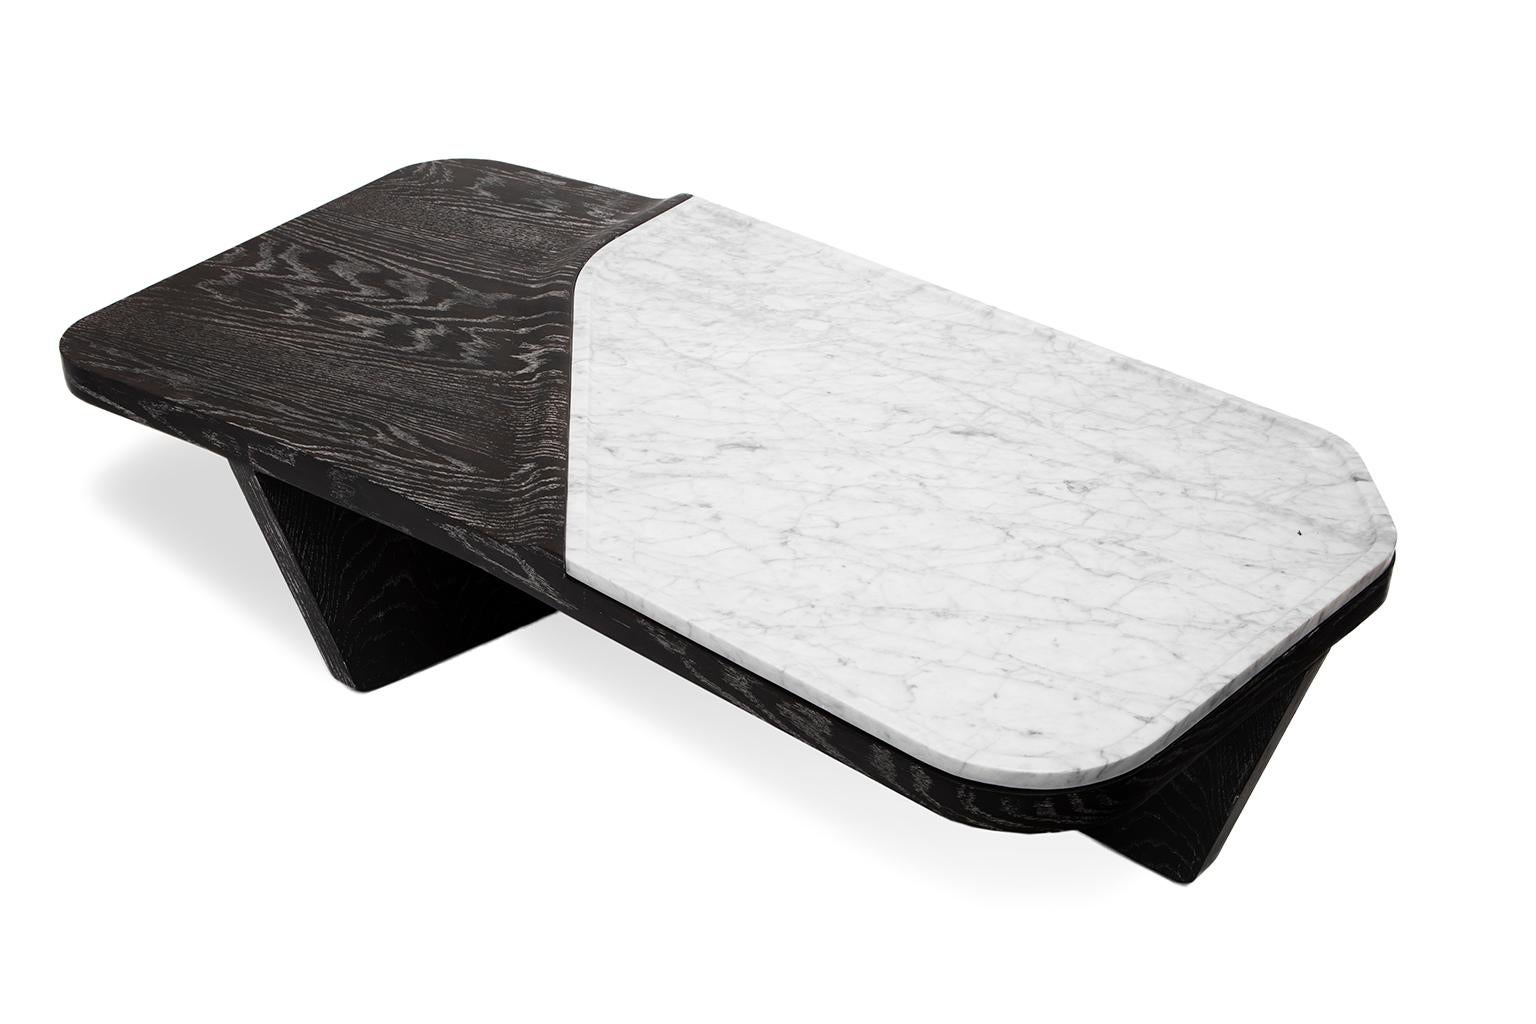 Cascade coffee table encapsulates a static energy, tactile natural materials are crafted to portray the subtle yet monumental the power of the ocean. Inspired by the moment a wave swells before turning in on itself forming a crystal clean lip which